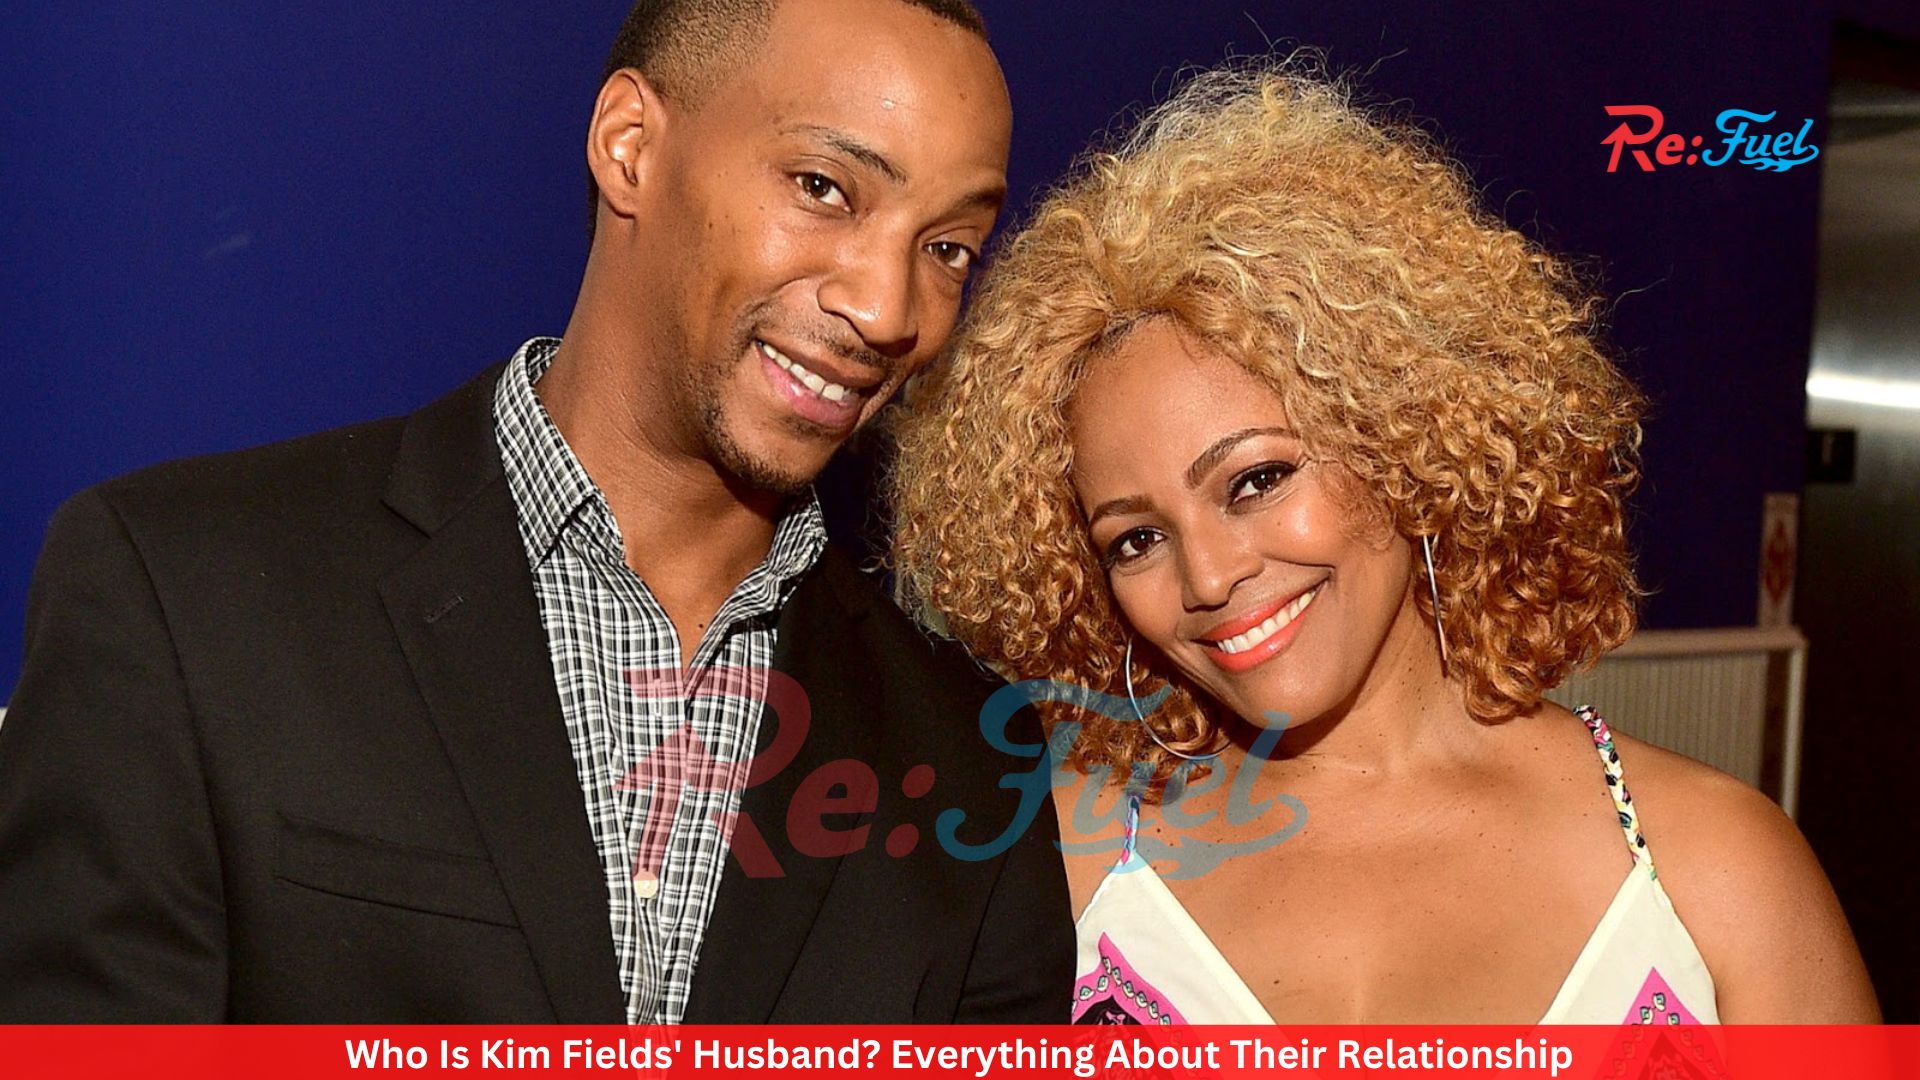 Who Is Kim Fields' Husband? Everything About Their Relationship